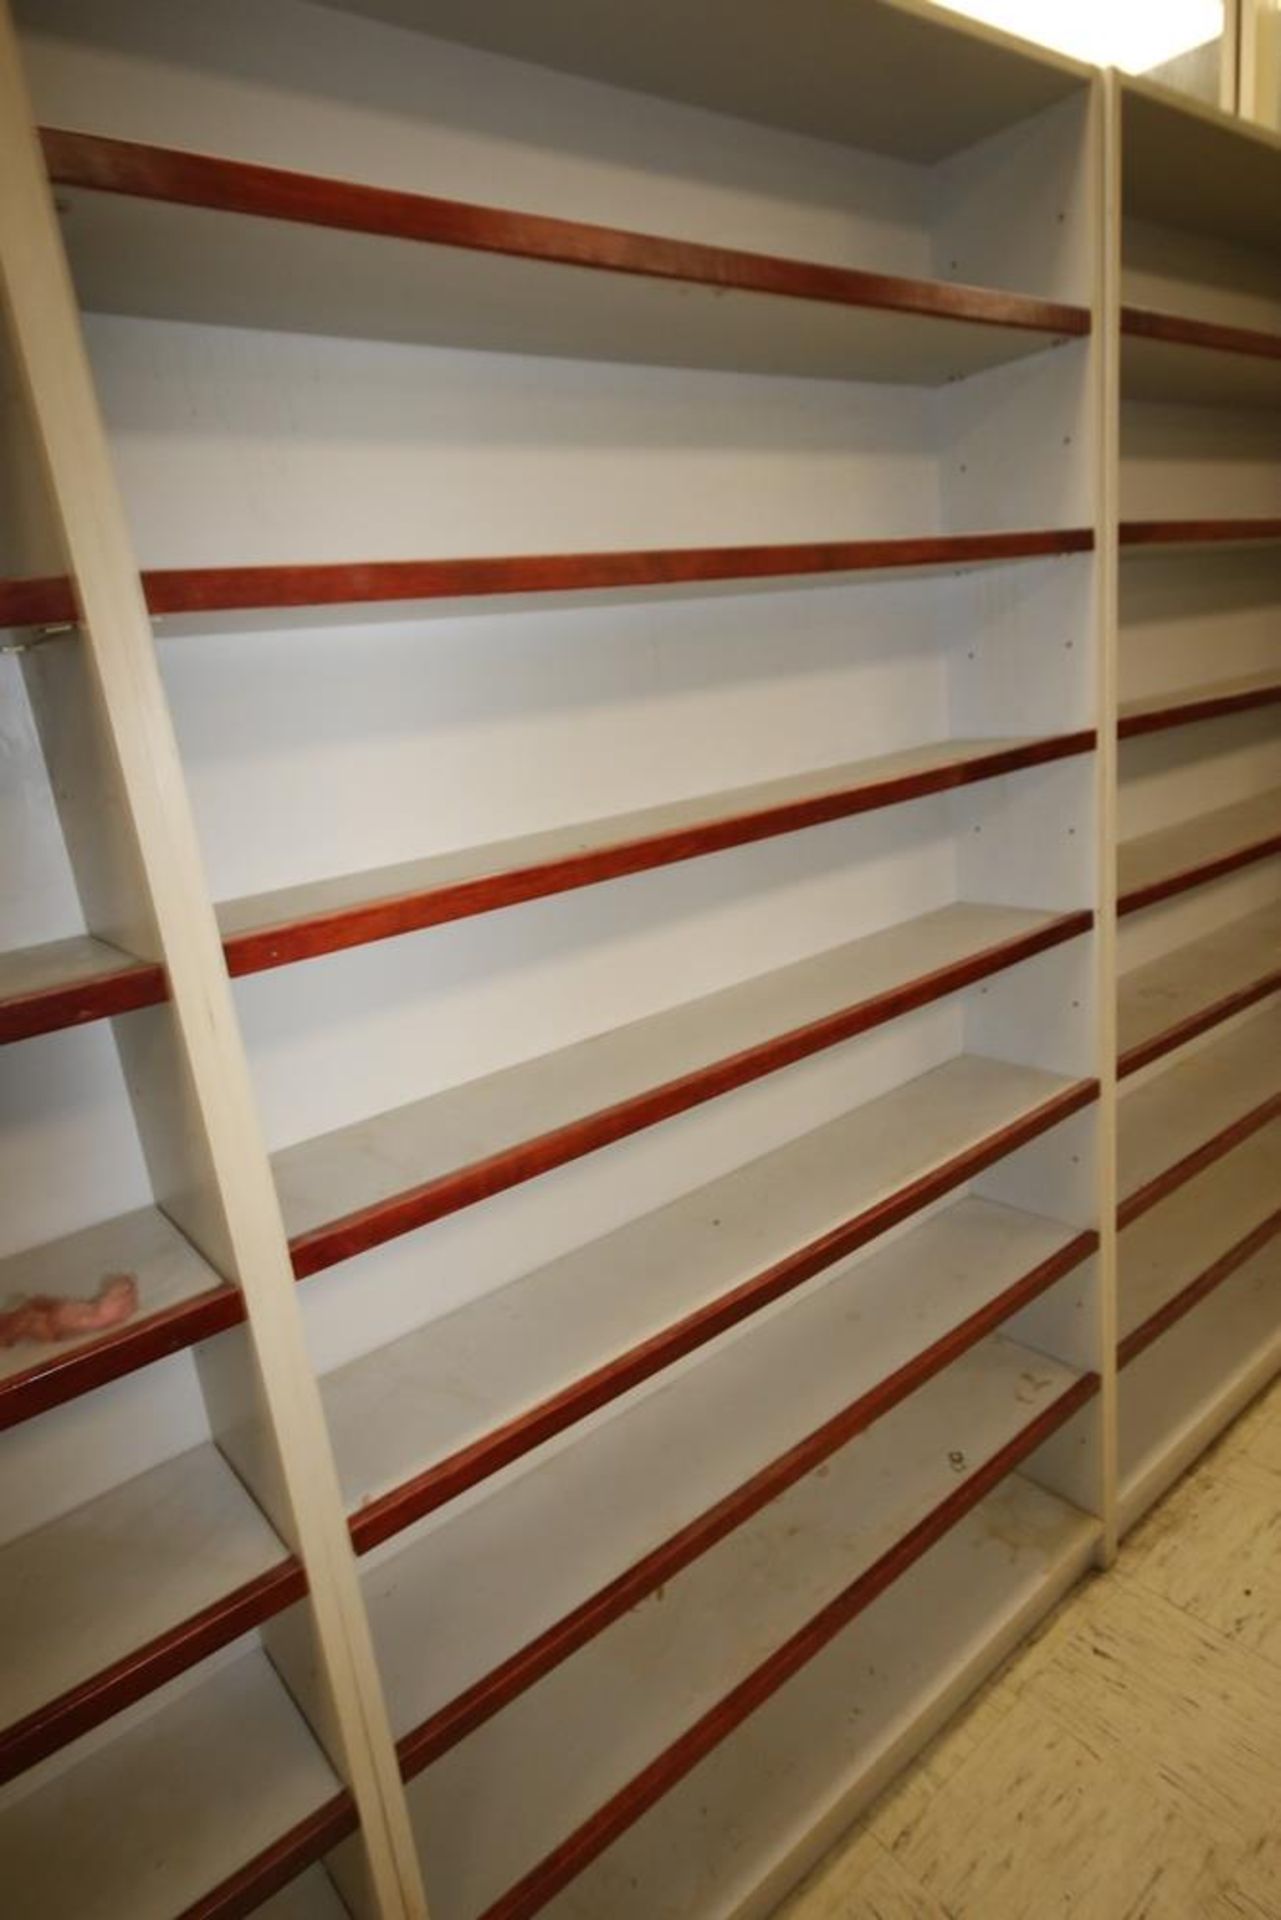 Sections of Wooden Lab Shelving, Section Overall Dims.: Aprox. 7' H x 4' W - Image 4 of 4